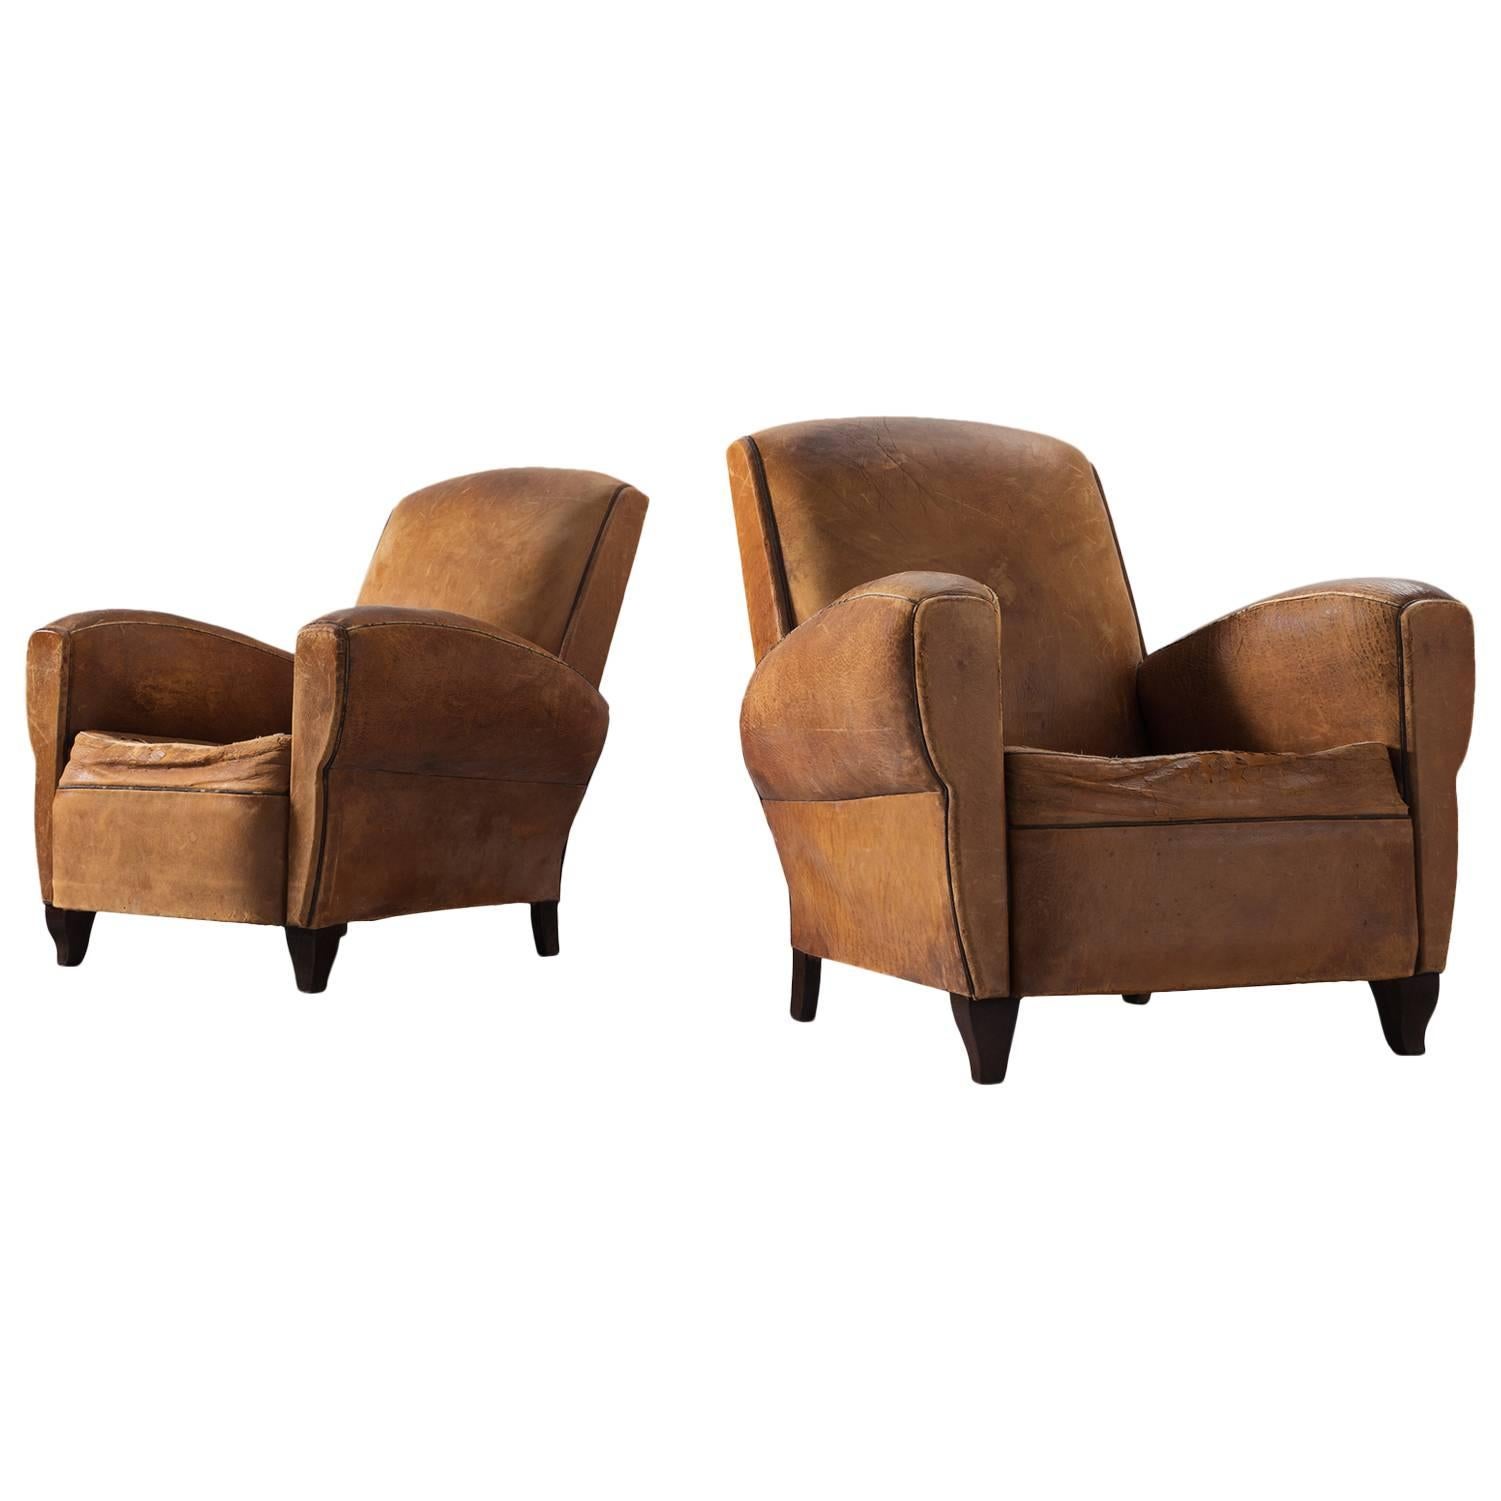 Set of Two Art Deco Club Chairs with Patinated Leather